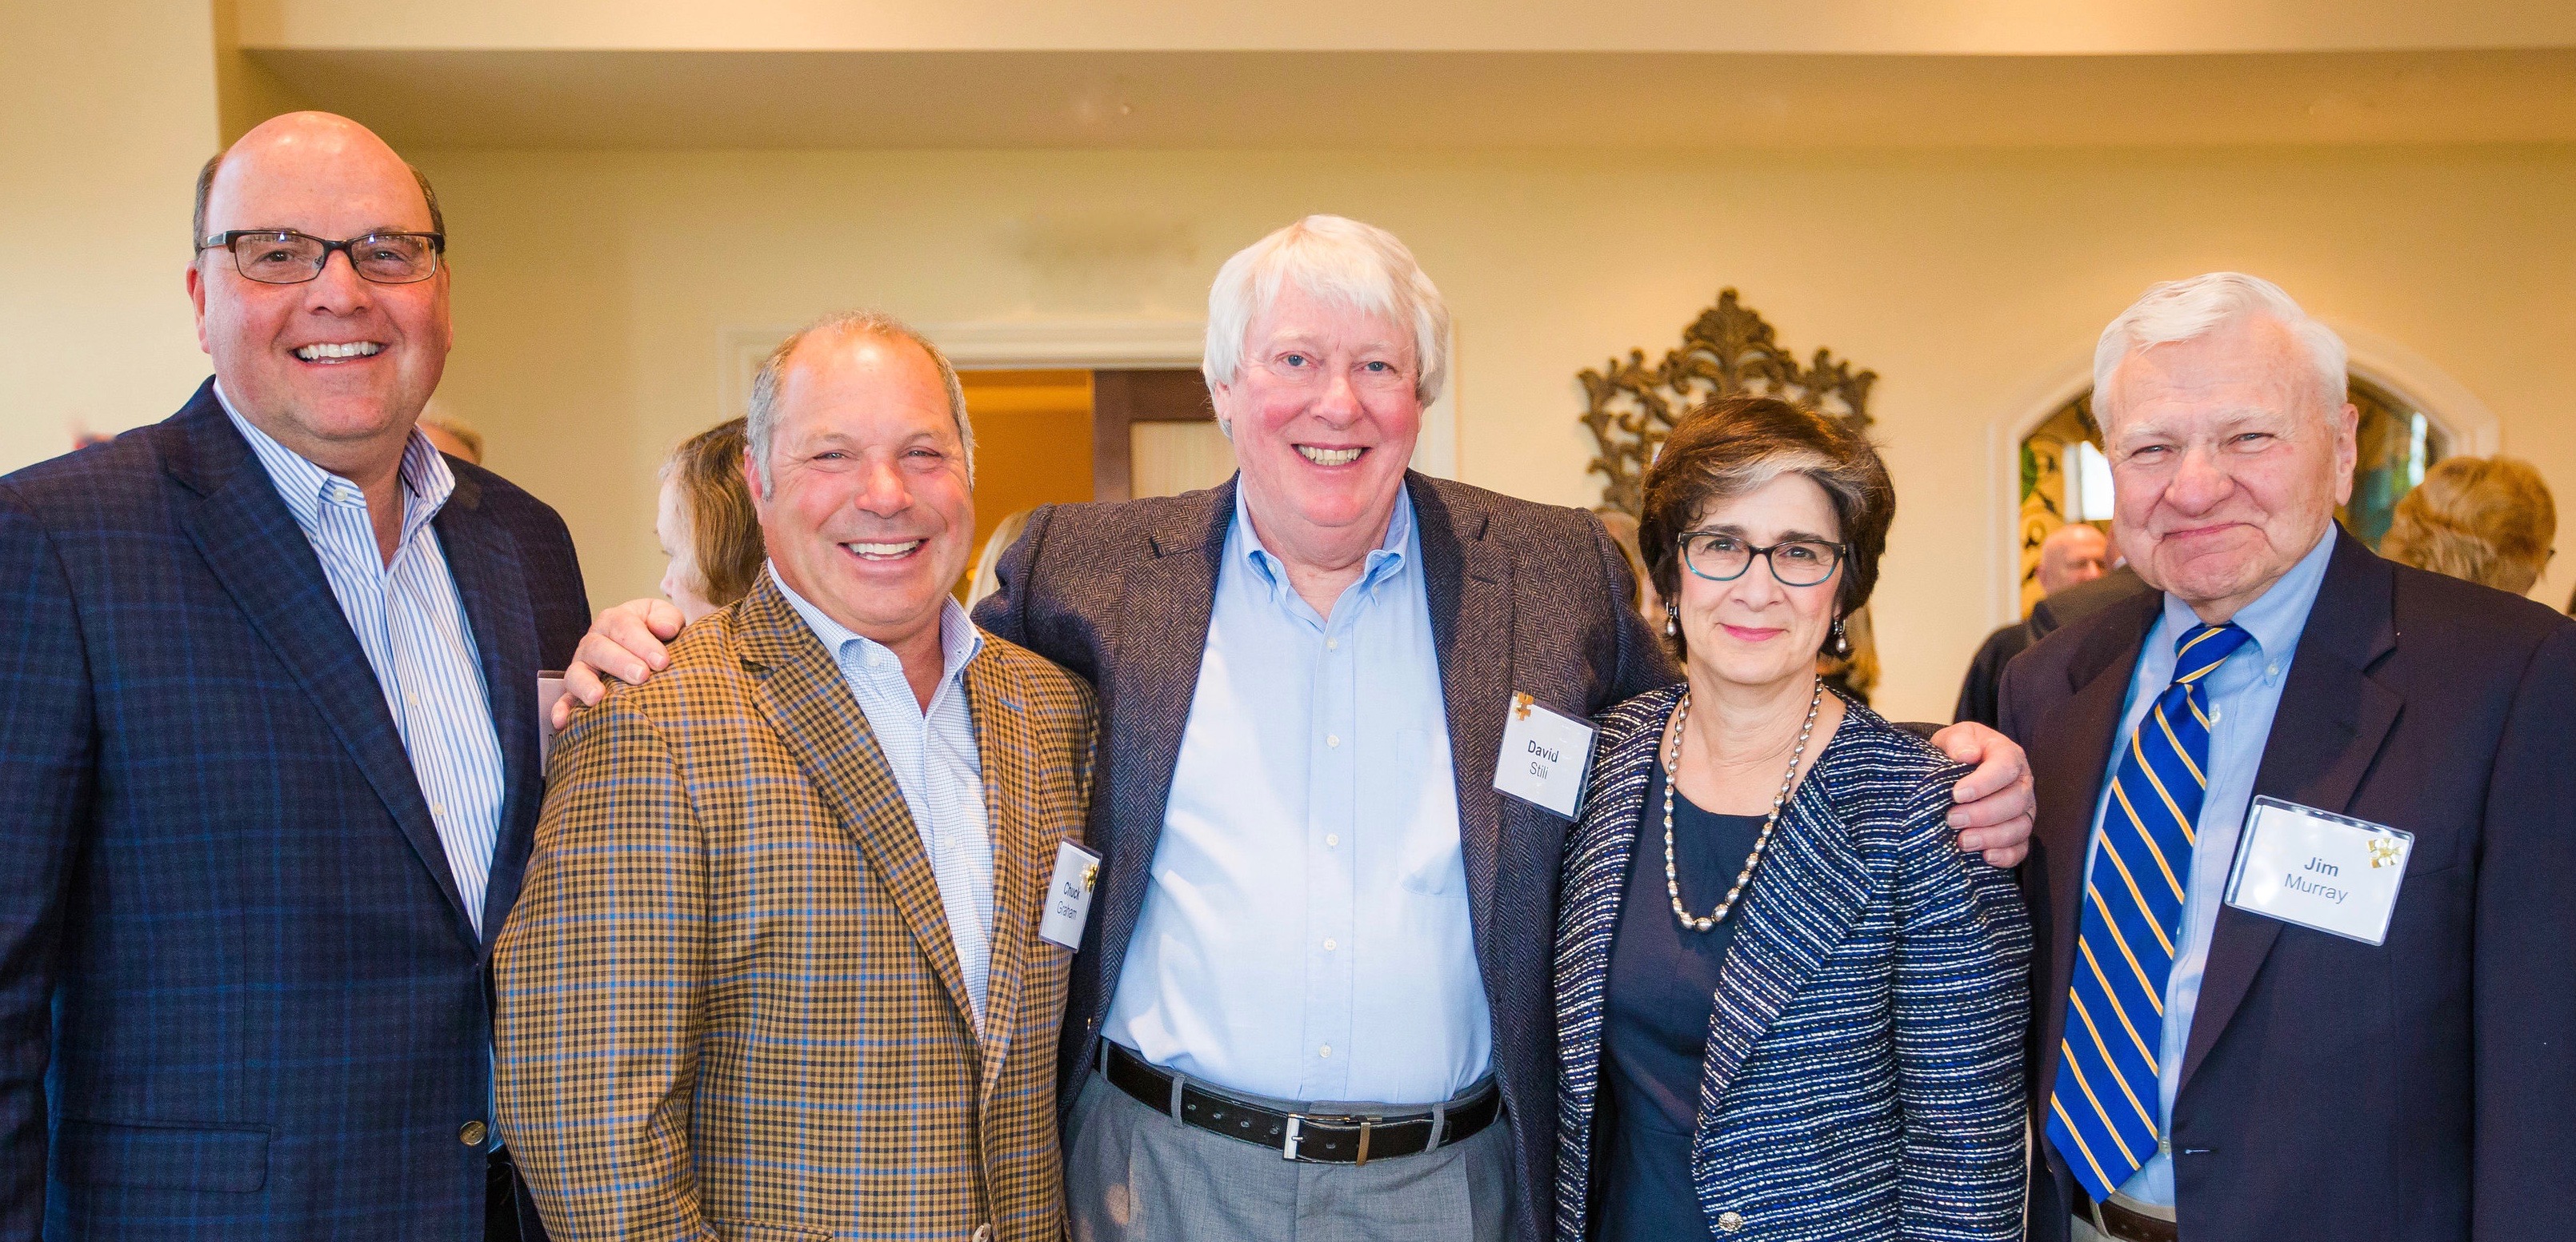 Golisano Foundation Trustees Phil DiPasquale, Chuck Graham, and David Still, Foundation Director Ann Costello, and Trustee Jim Murray at Golisano Autism Center joint board meeting, Apr 10, 2018.